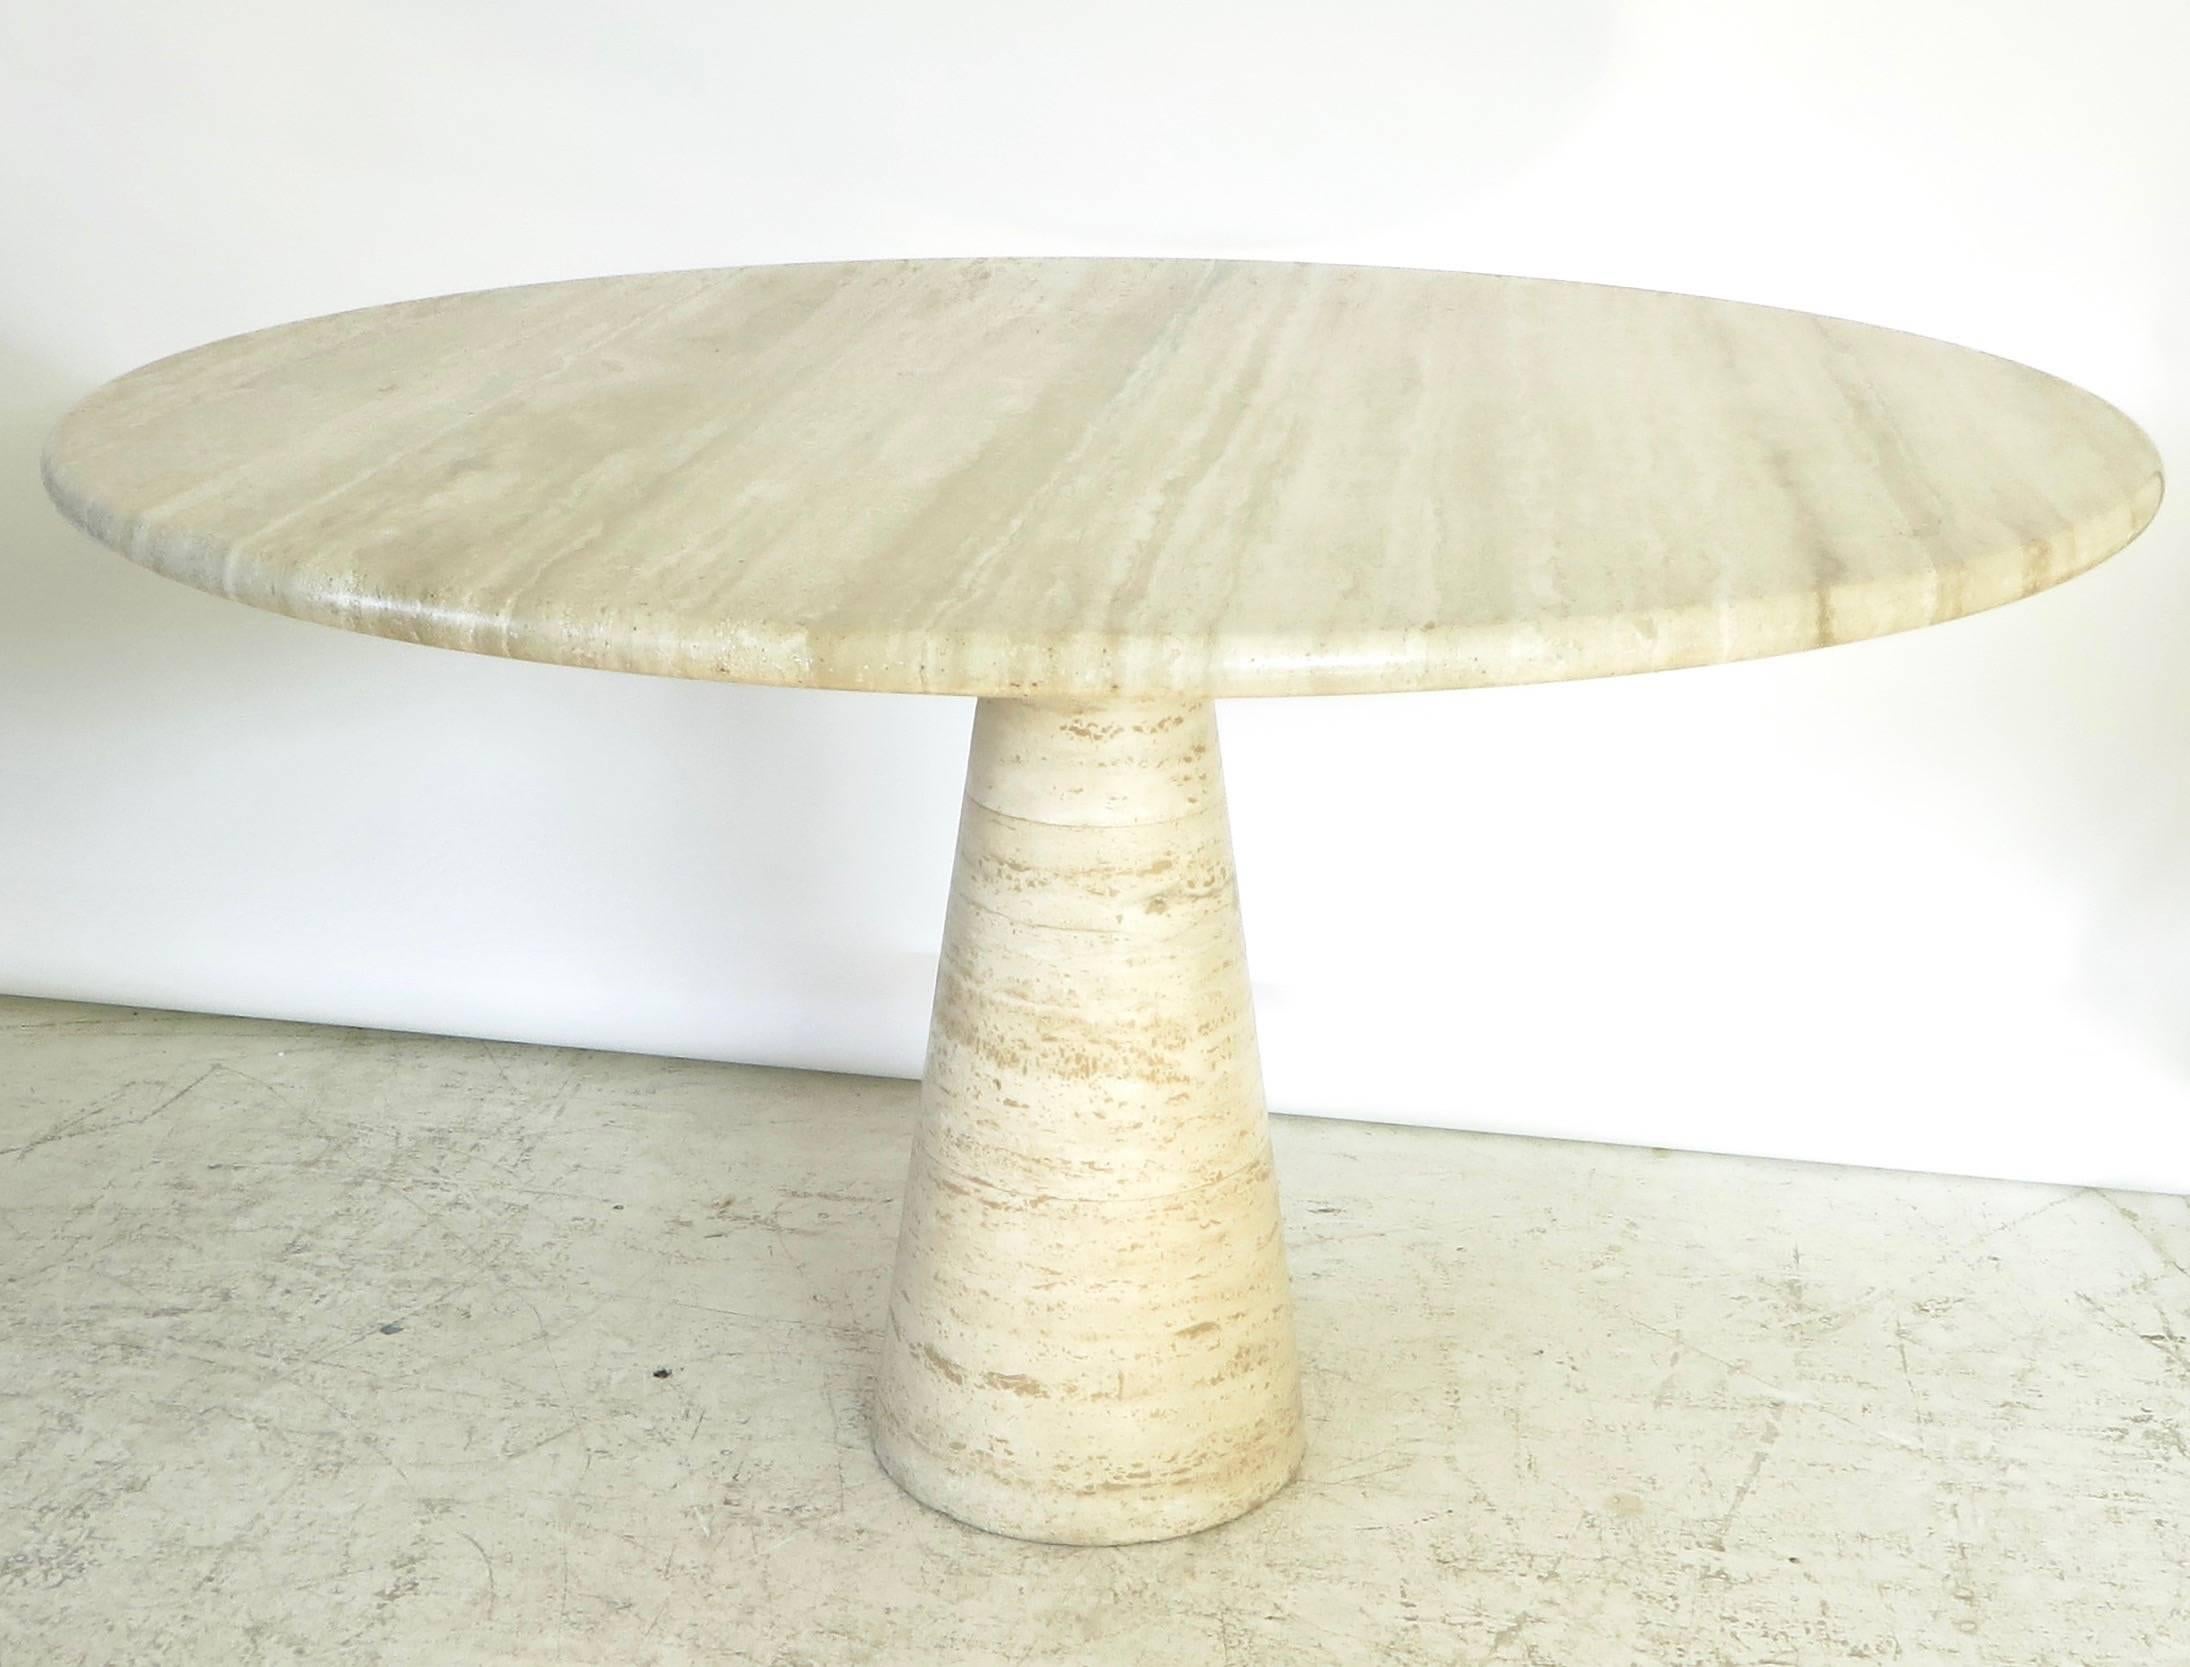 Italian travertine dining or center table attributed to Angelo Mangiarotti.
Variegated tones of cream, beige, pale brown and touches of gray travertine marble,
Italy, circa 1970.
Please note that we have two tables, they are very very similar but as